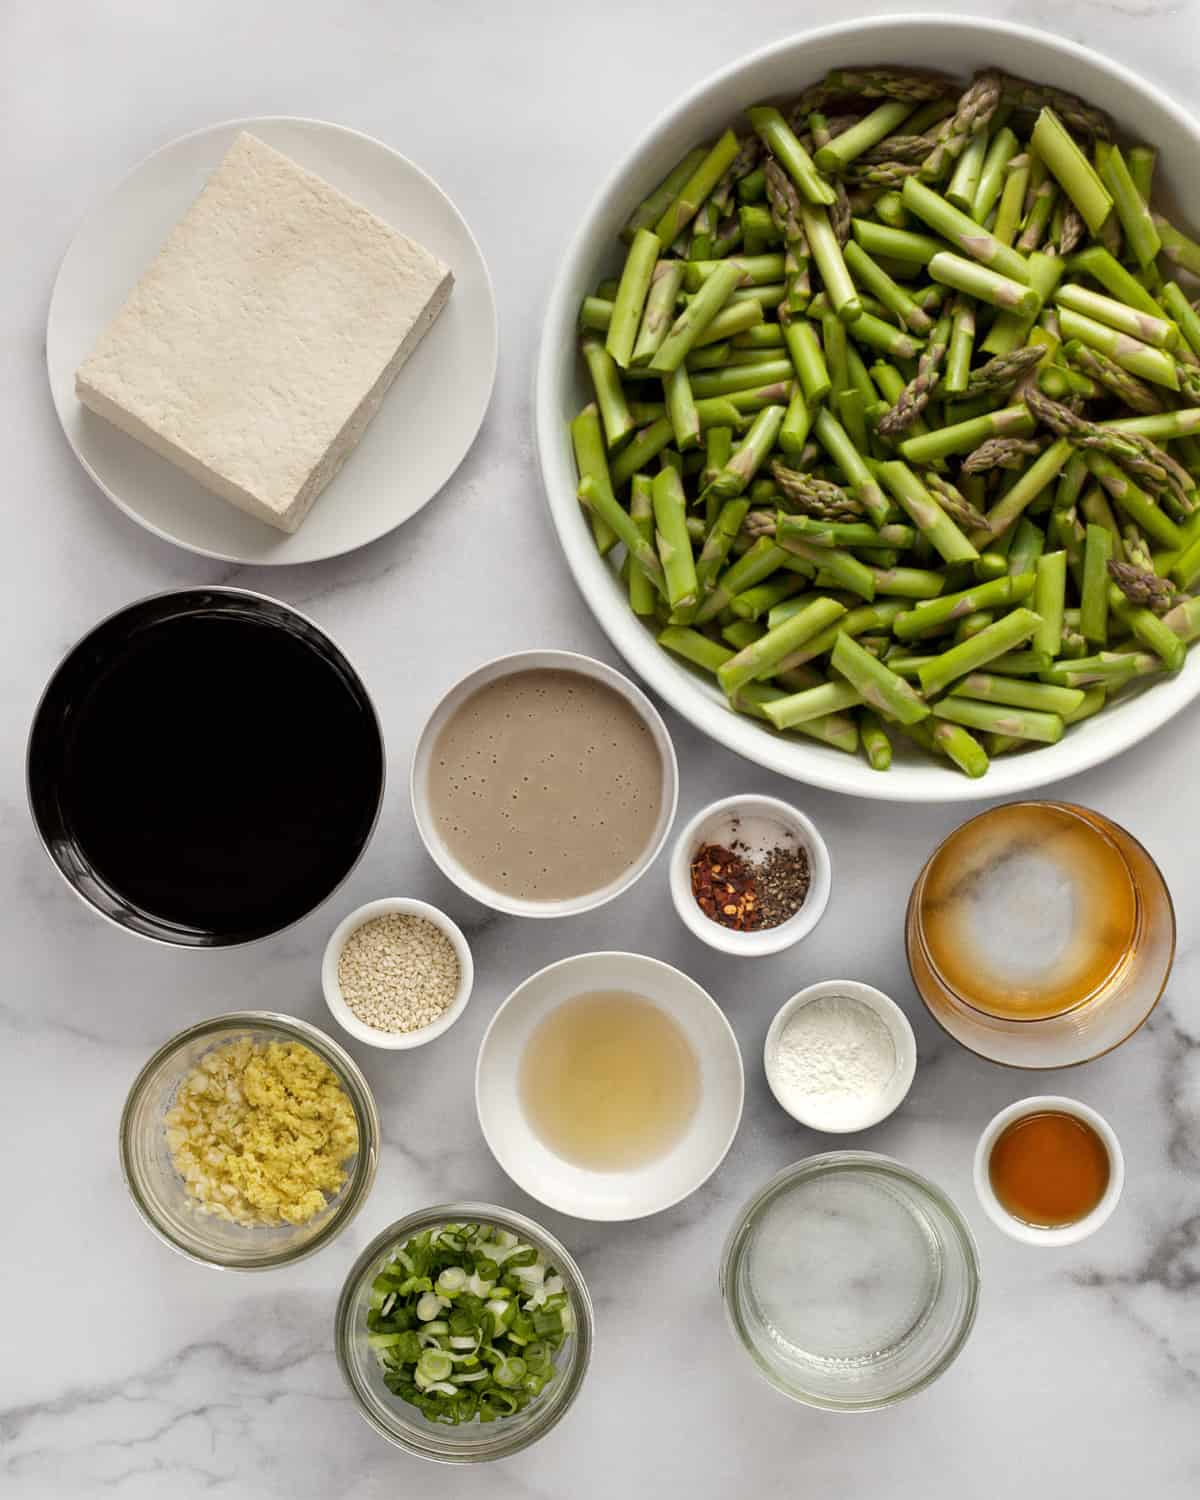 Ingredients including asparagus, tofu, soy sauce, tahini, maple syrup, rice vinegar, scallions, garlic, ginger, oil and seasonings.